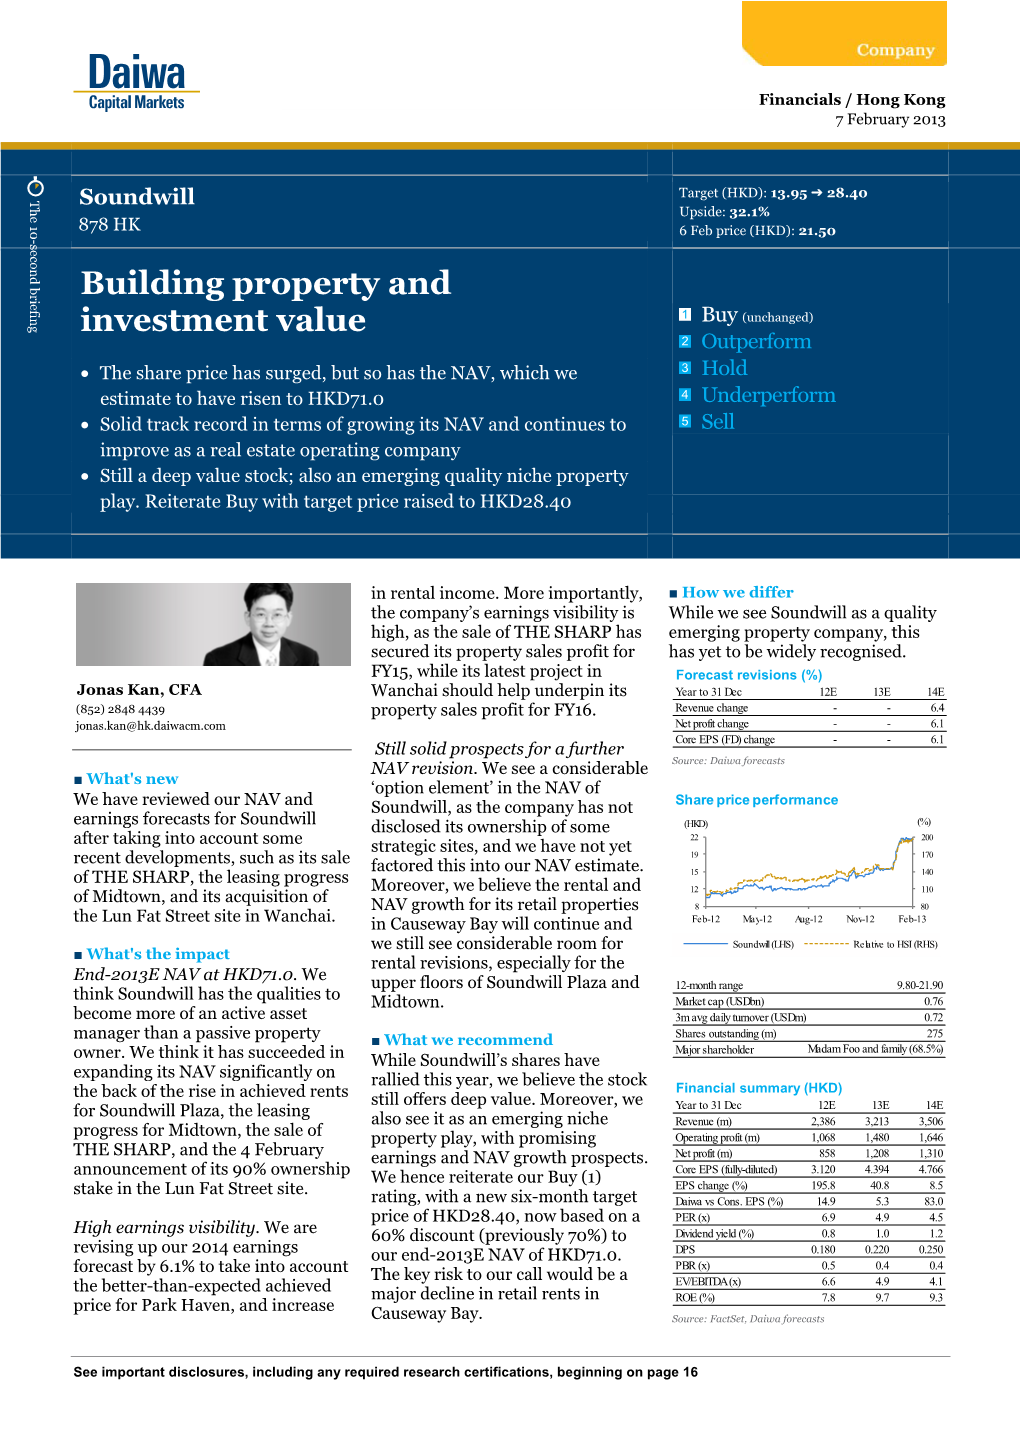 Building Property and Investment Value